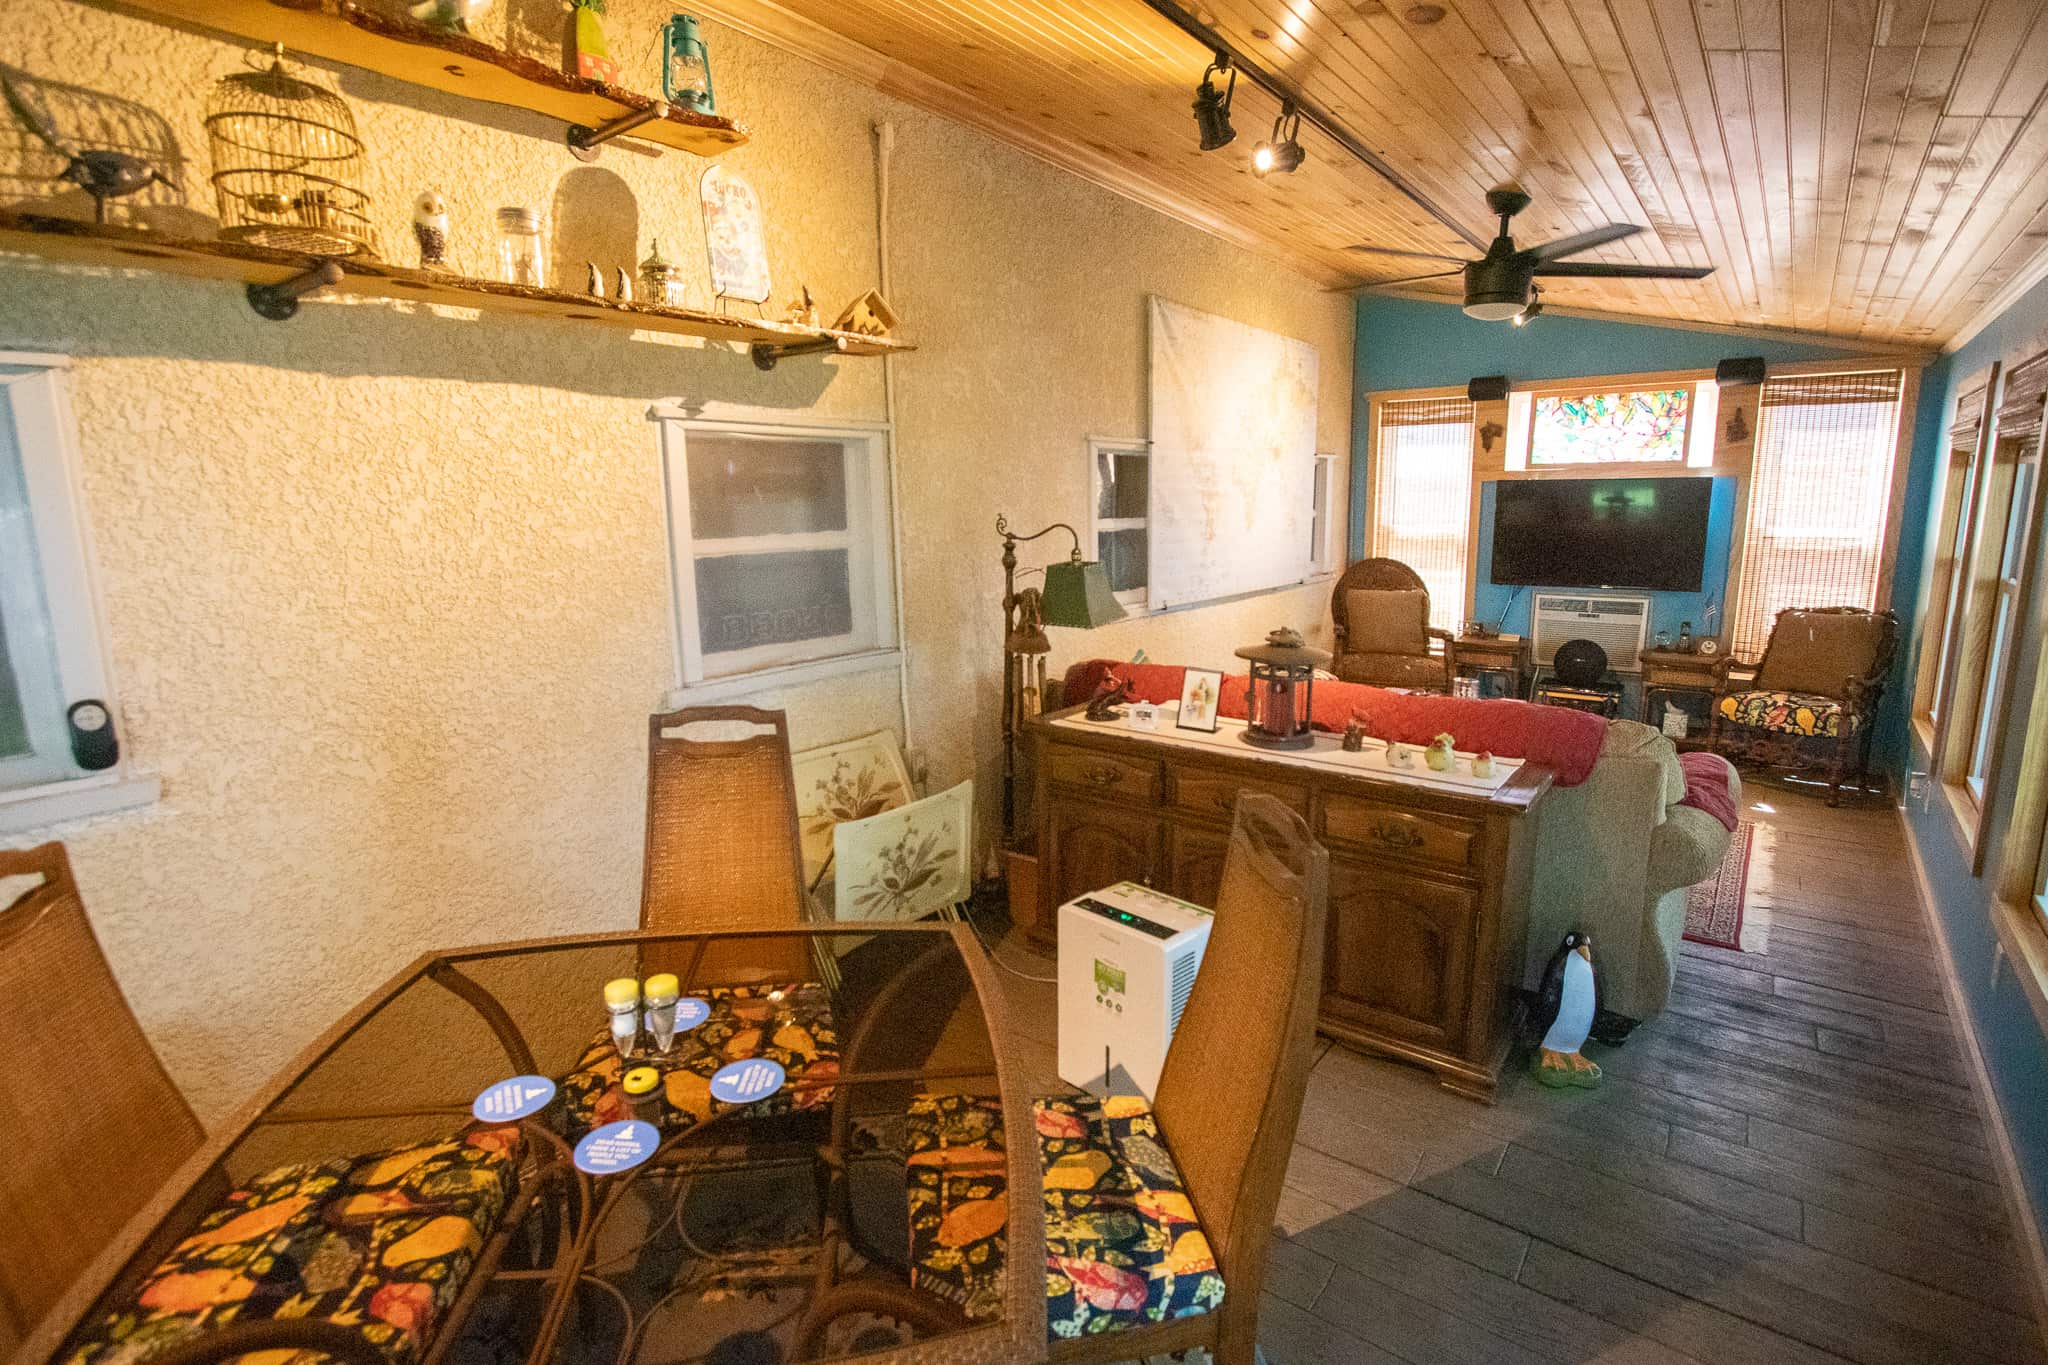 This room has nearly all the conveniences of the garage stalls, including AC, heat and television. Most of the furniture and decorative touches were destined for the trash before Vic and Nancy found them.